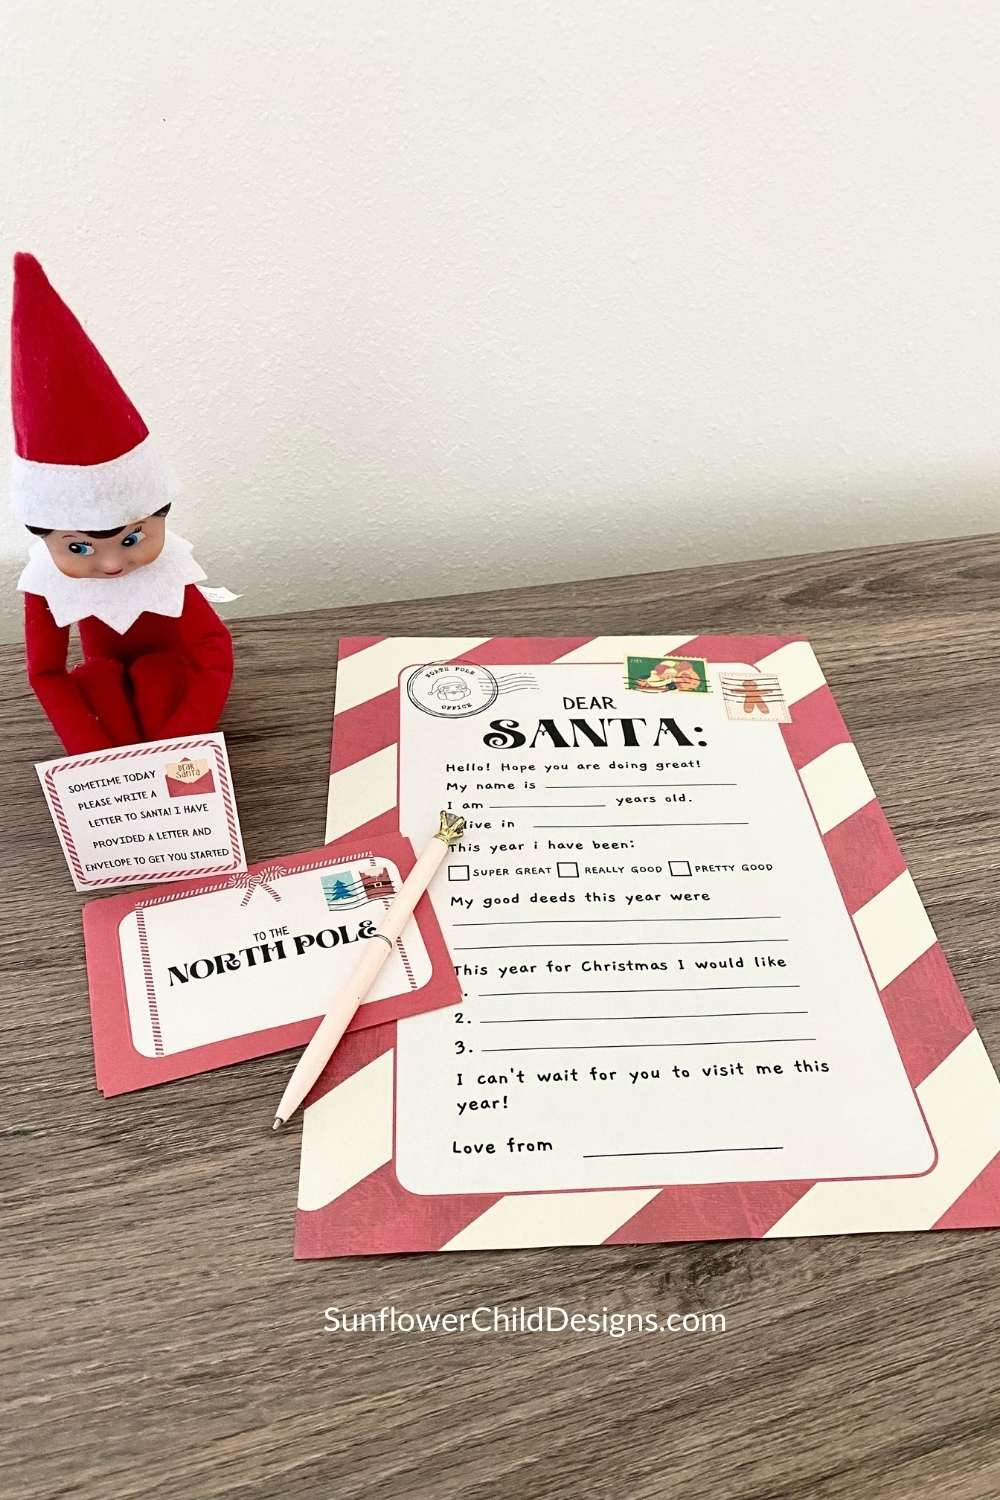 Elf brings a letter to Santa from children